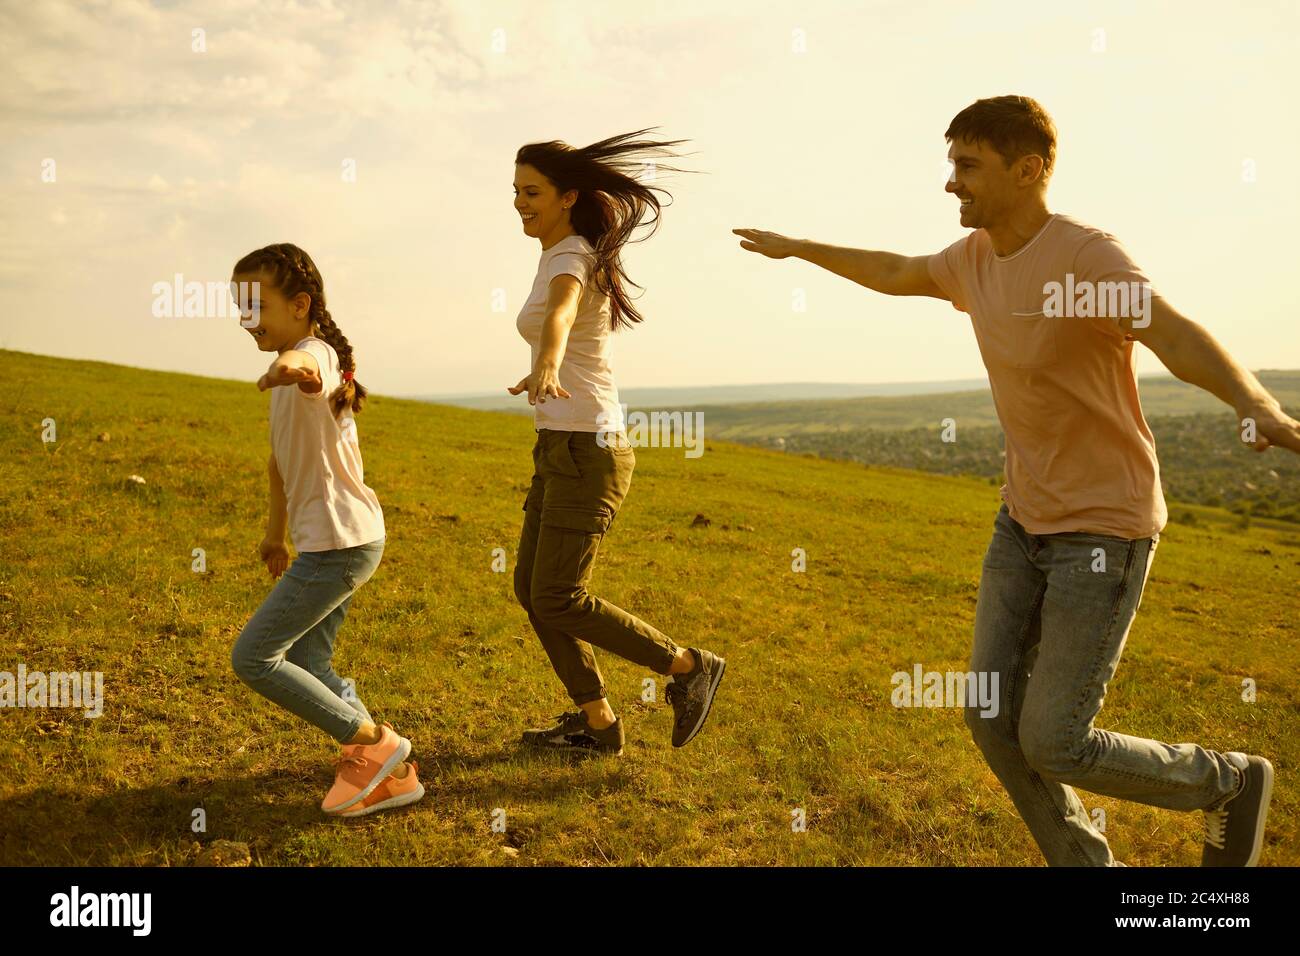 Joyful family with mom, dad and little kid running in mountains. Parents with child having fun playing airplane game Stock Photo